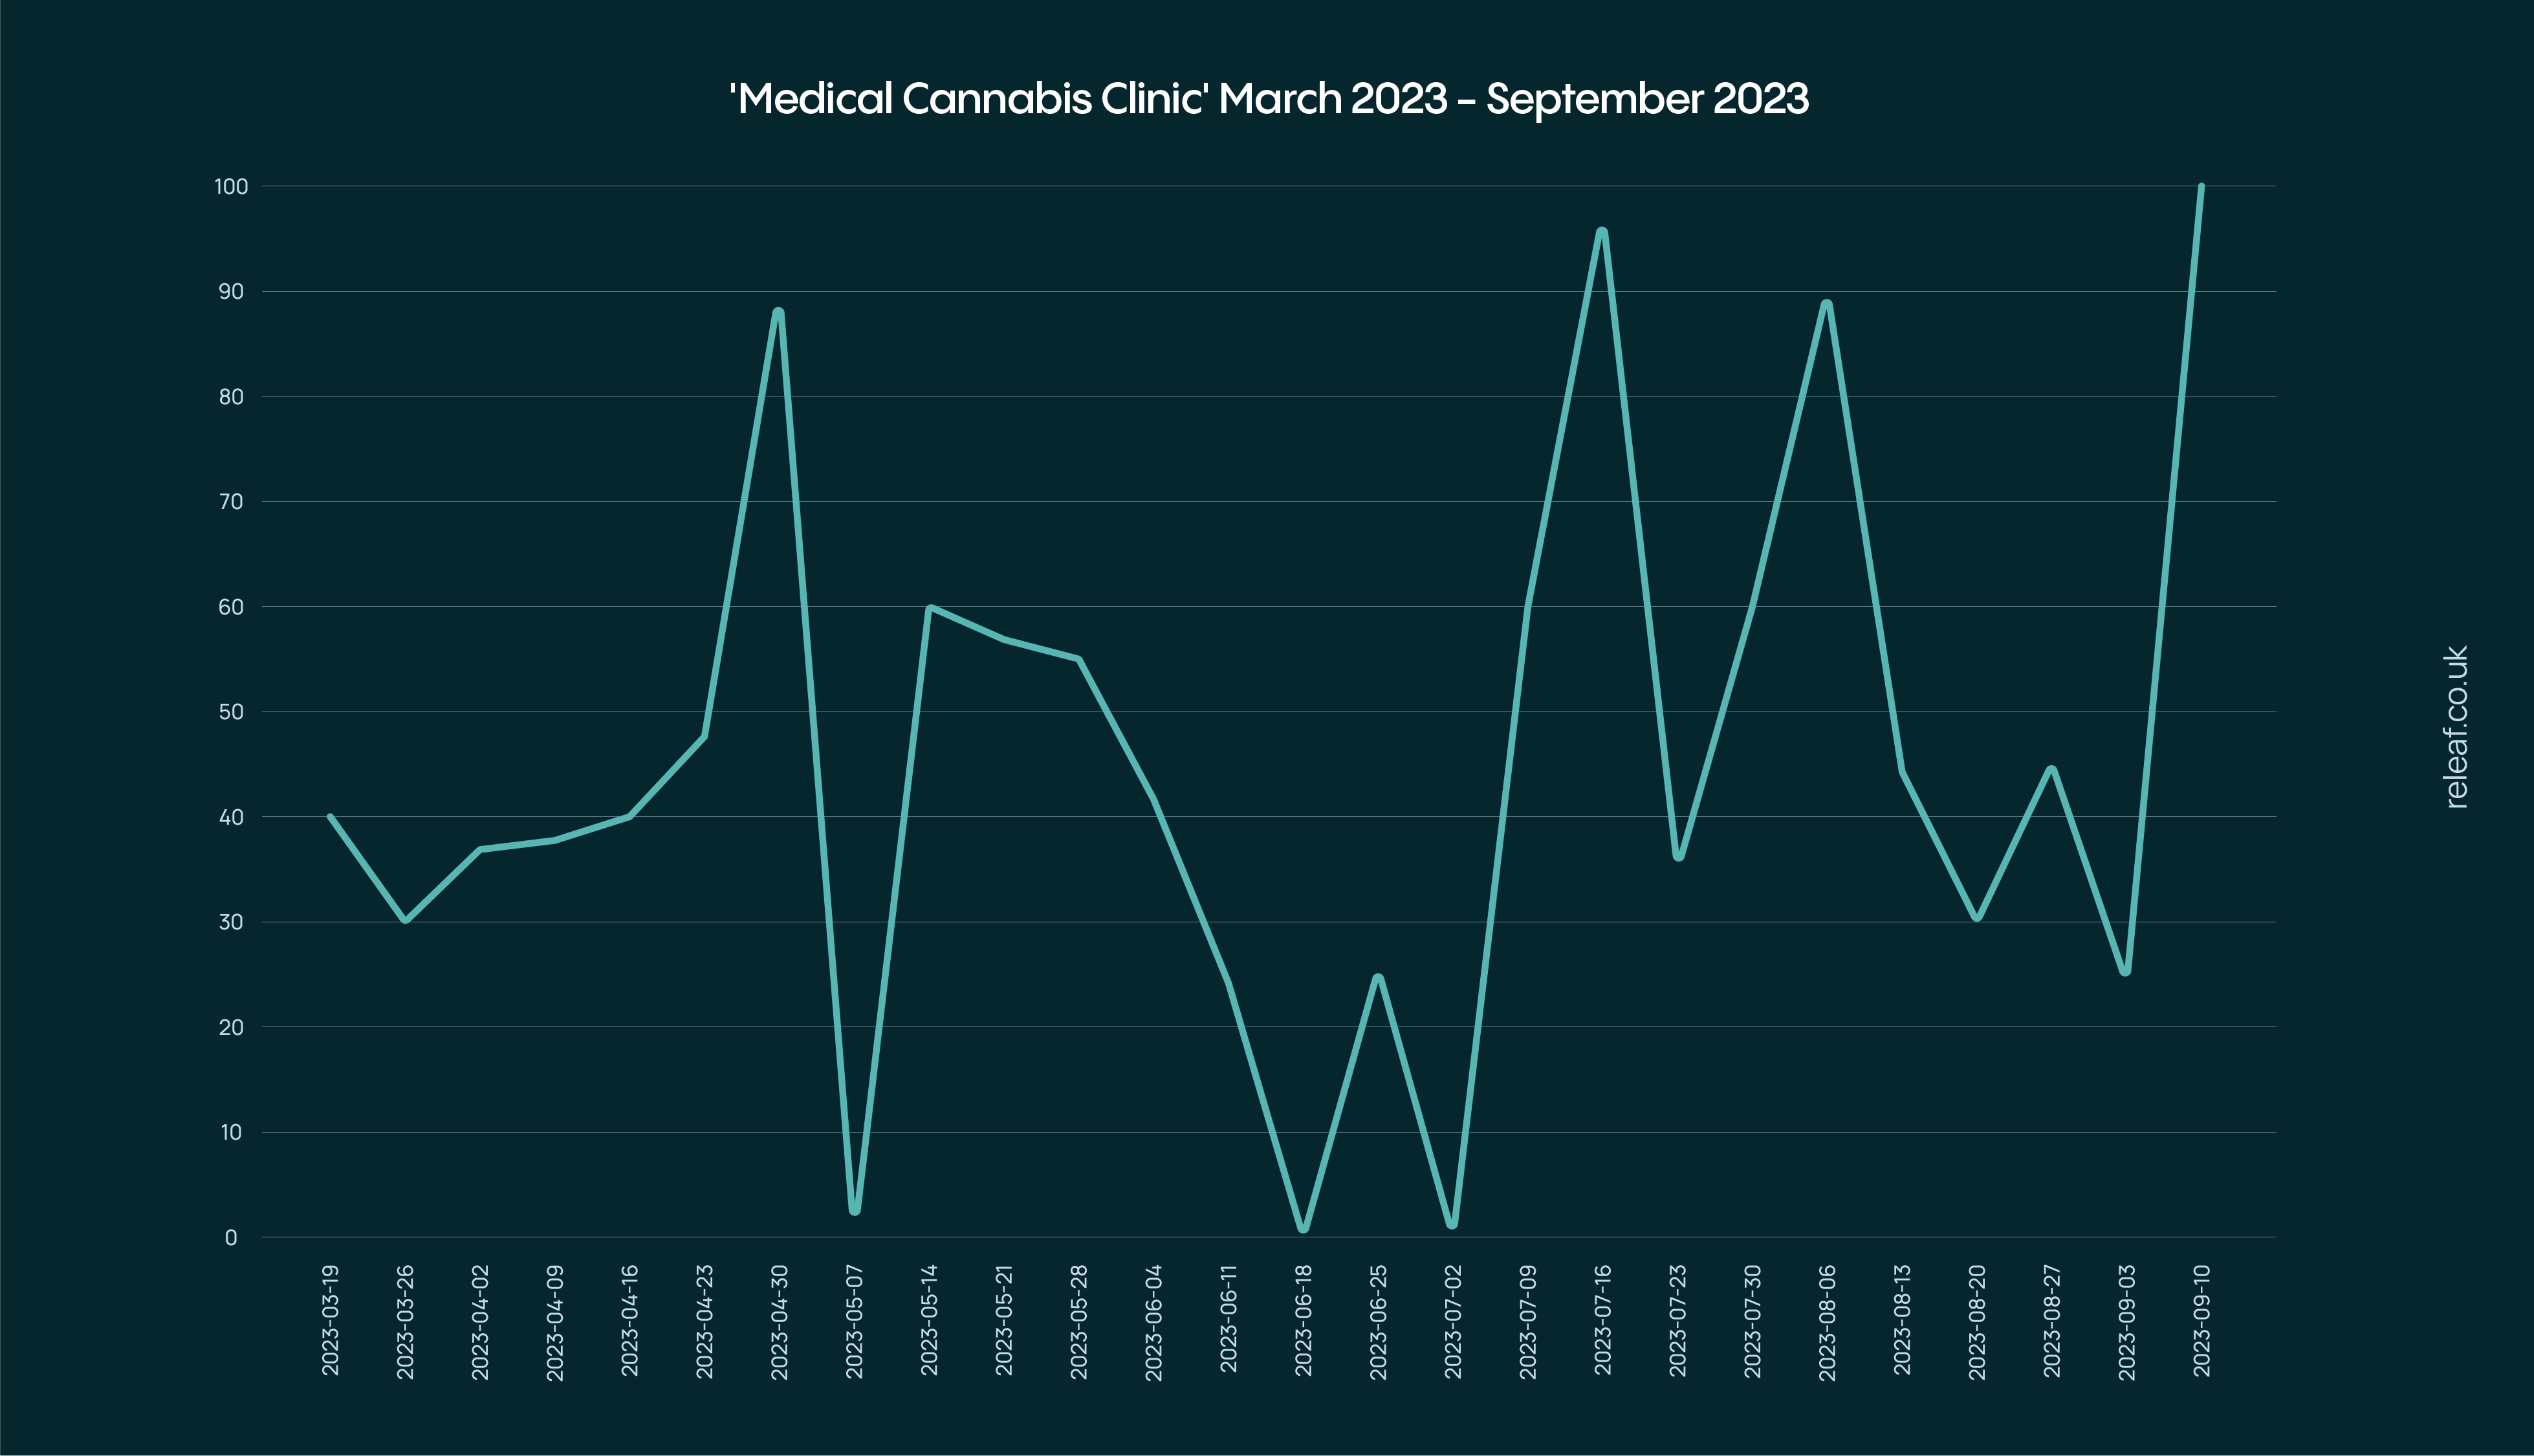 medical cannabis clinic search demand march 2023 to september 2023